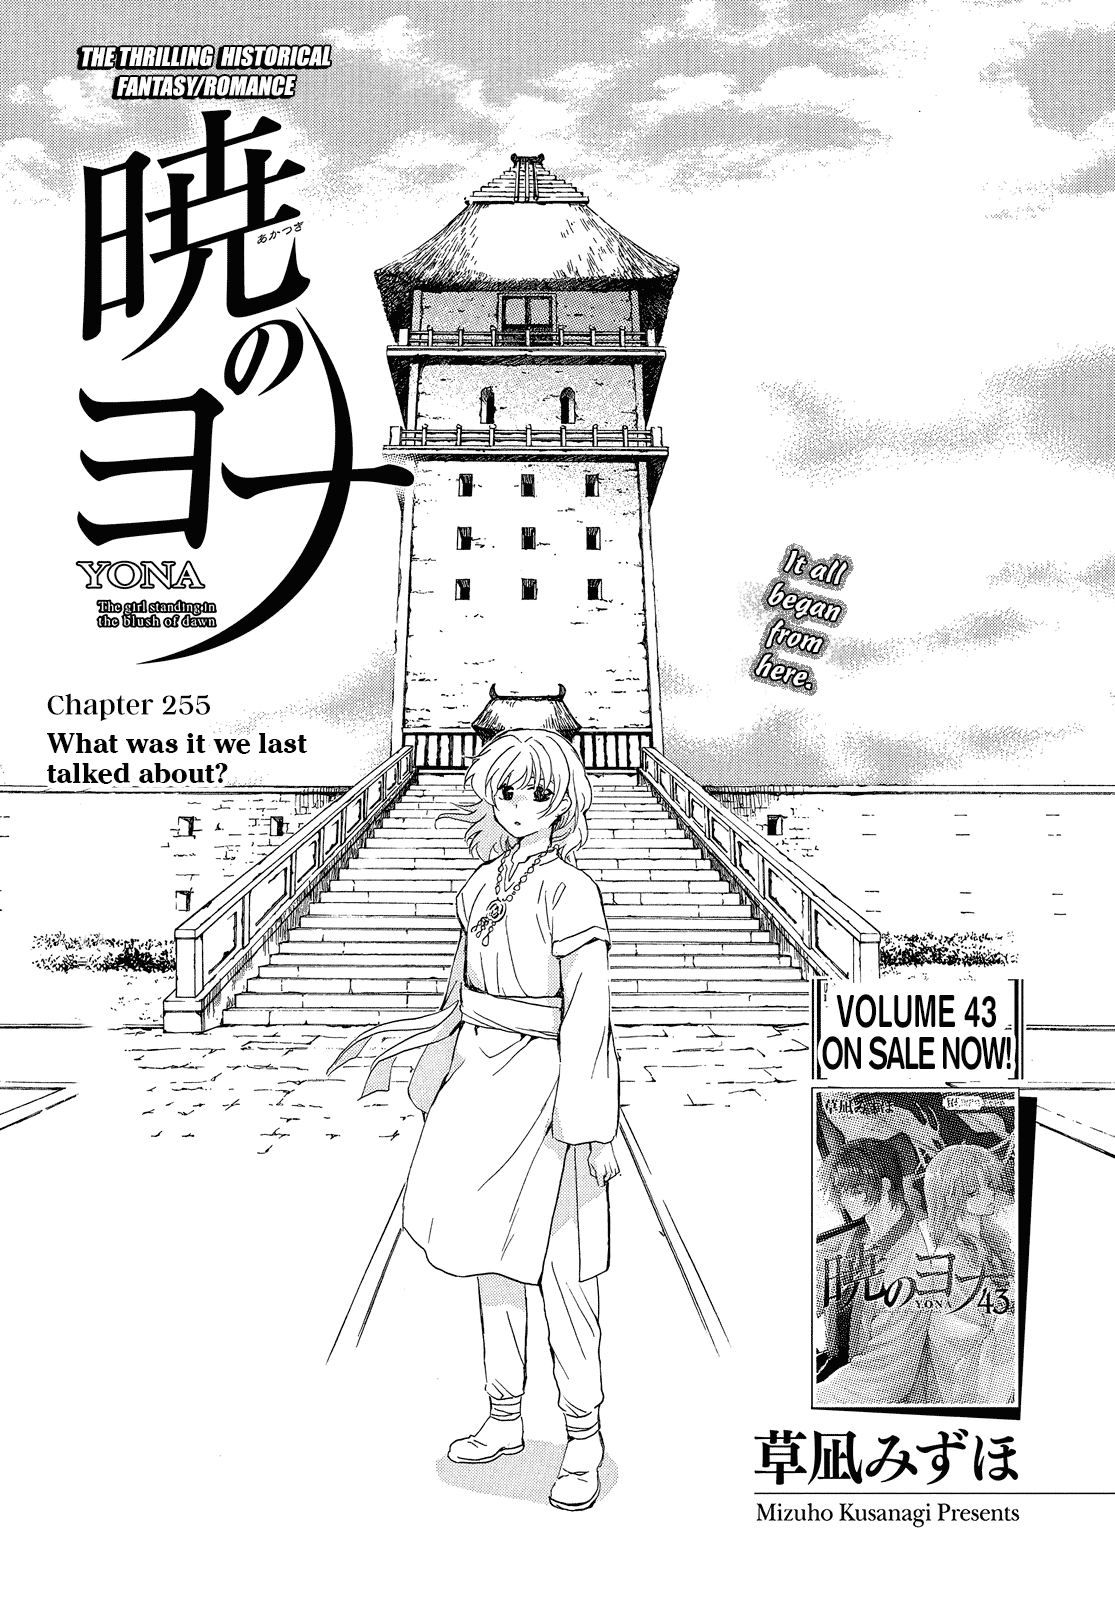 Akatsuki No Yona, Chapter 255 What was it we last talked about image 02